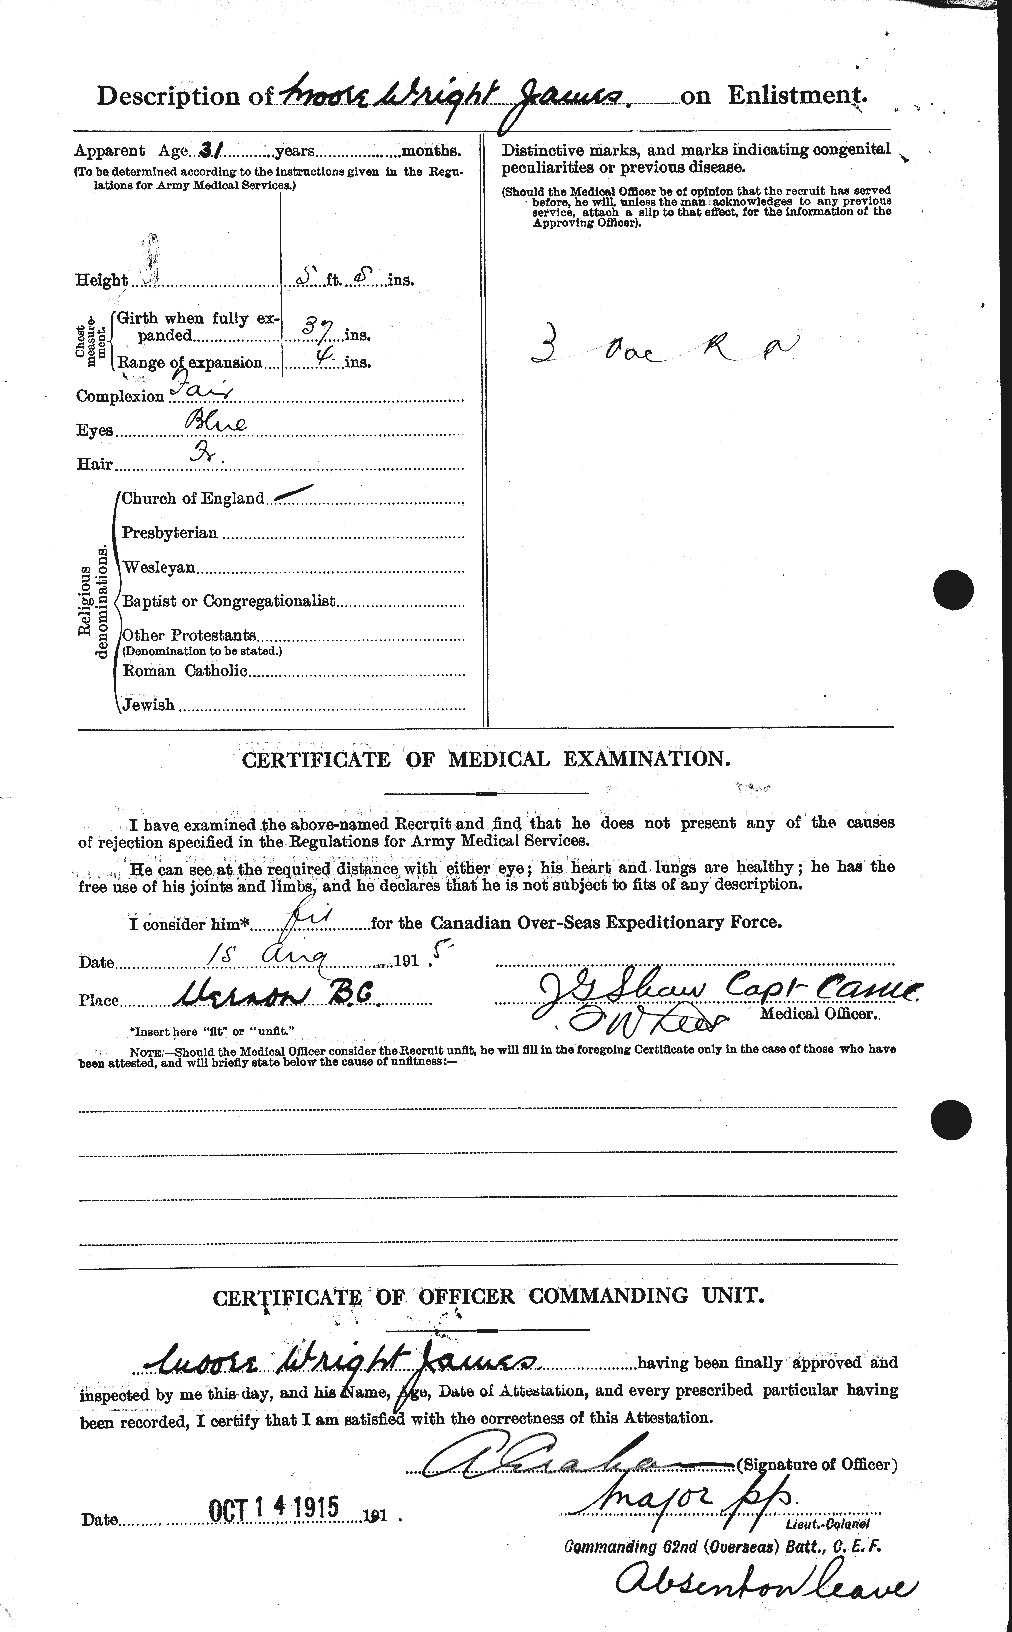 Personnel Records of the First World War - CEF 502242b